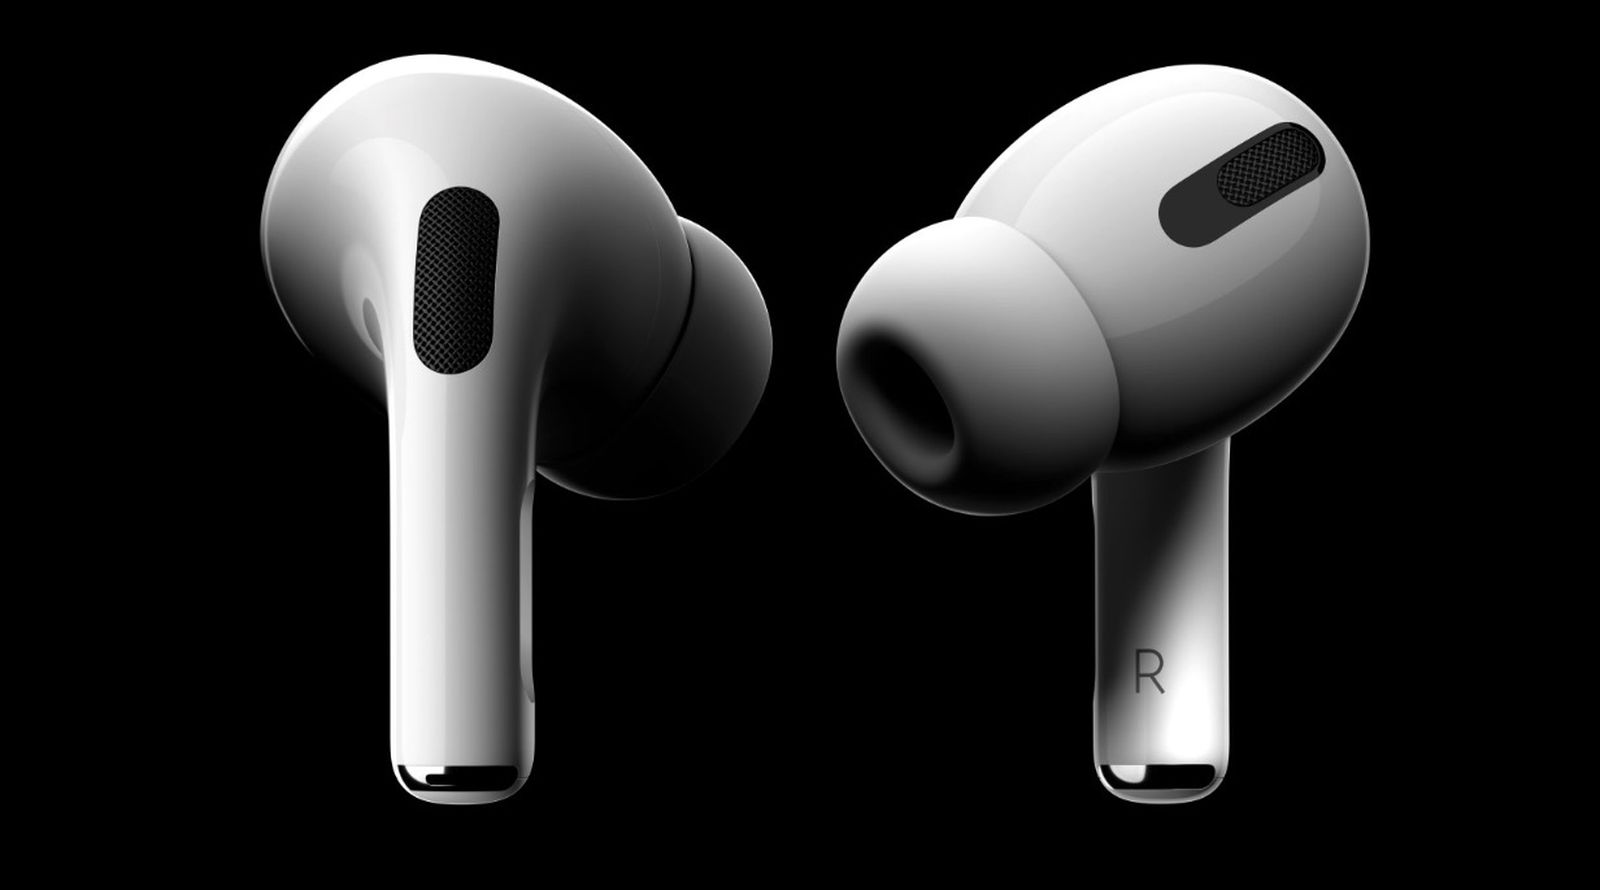 Gurman: New AirPods Pro Will Be Announced at Apple Event This Week